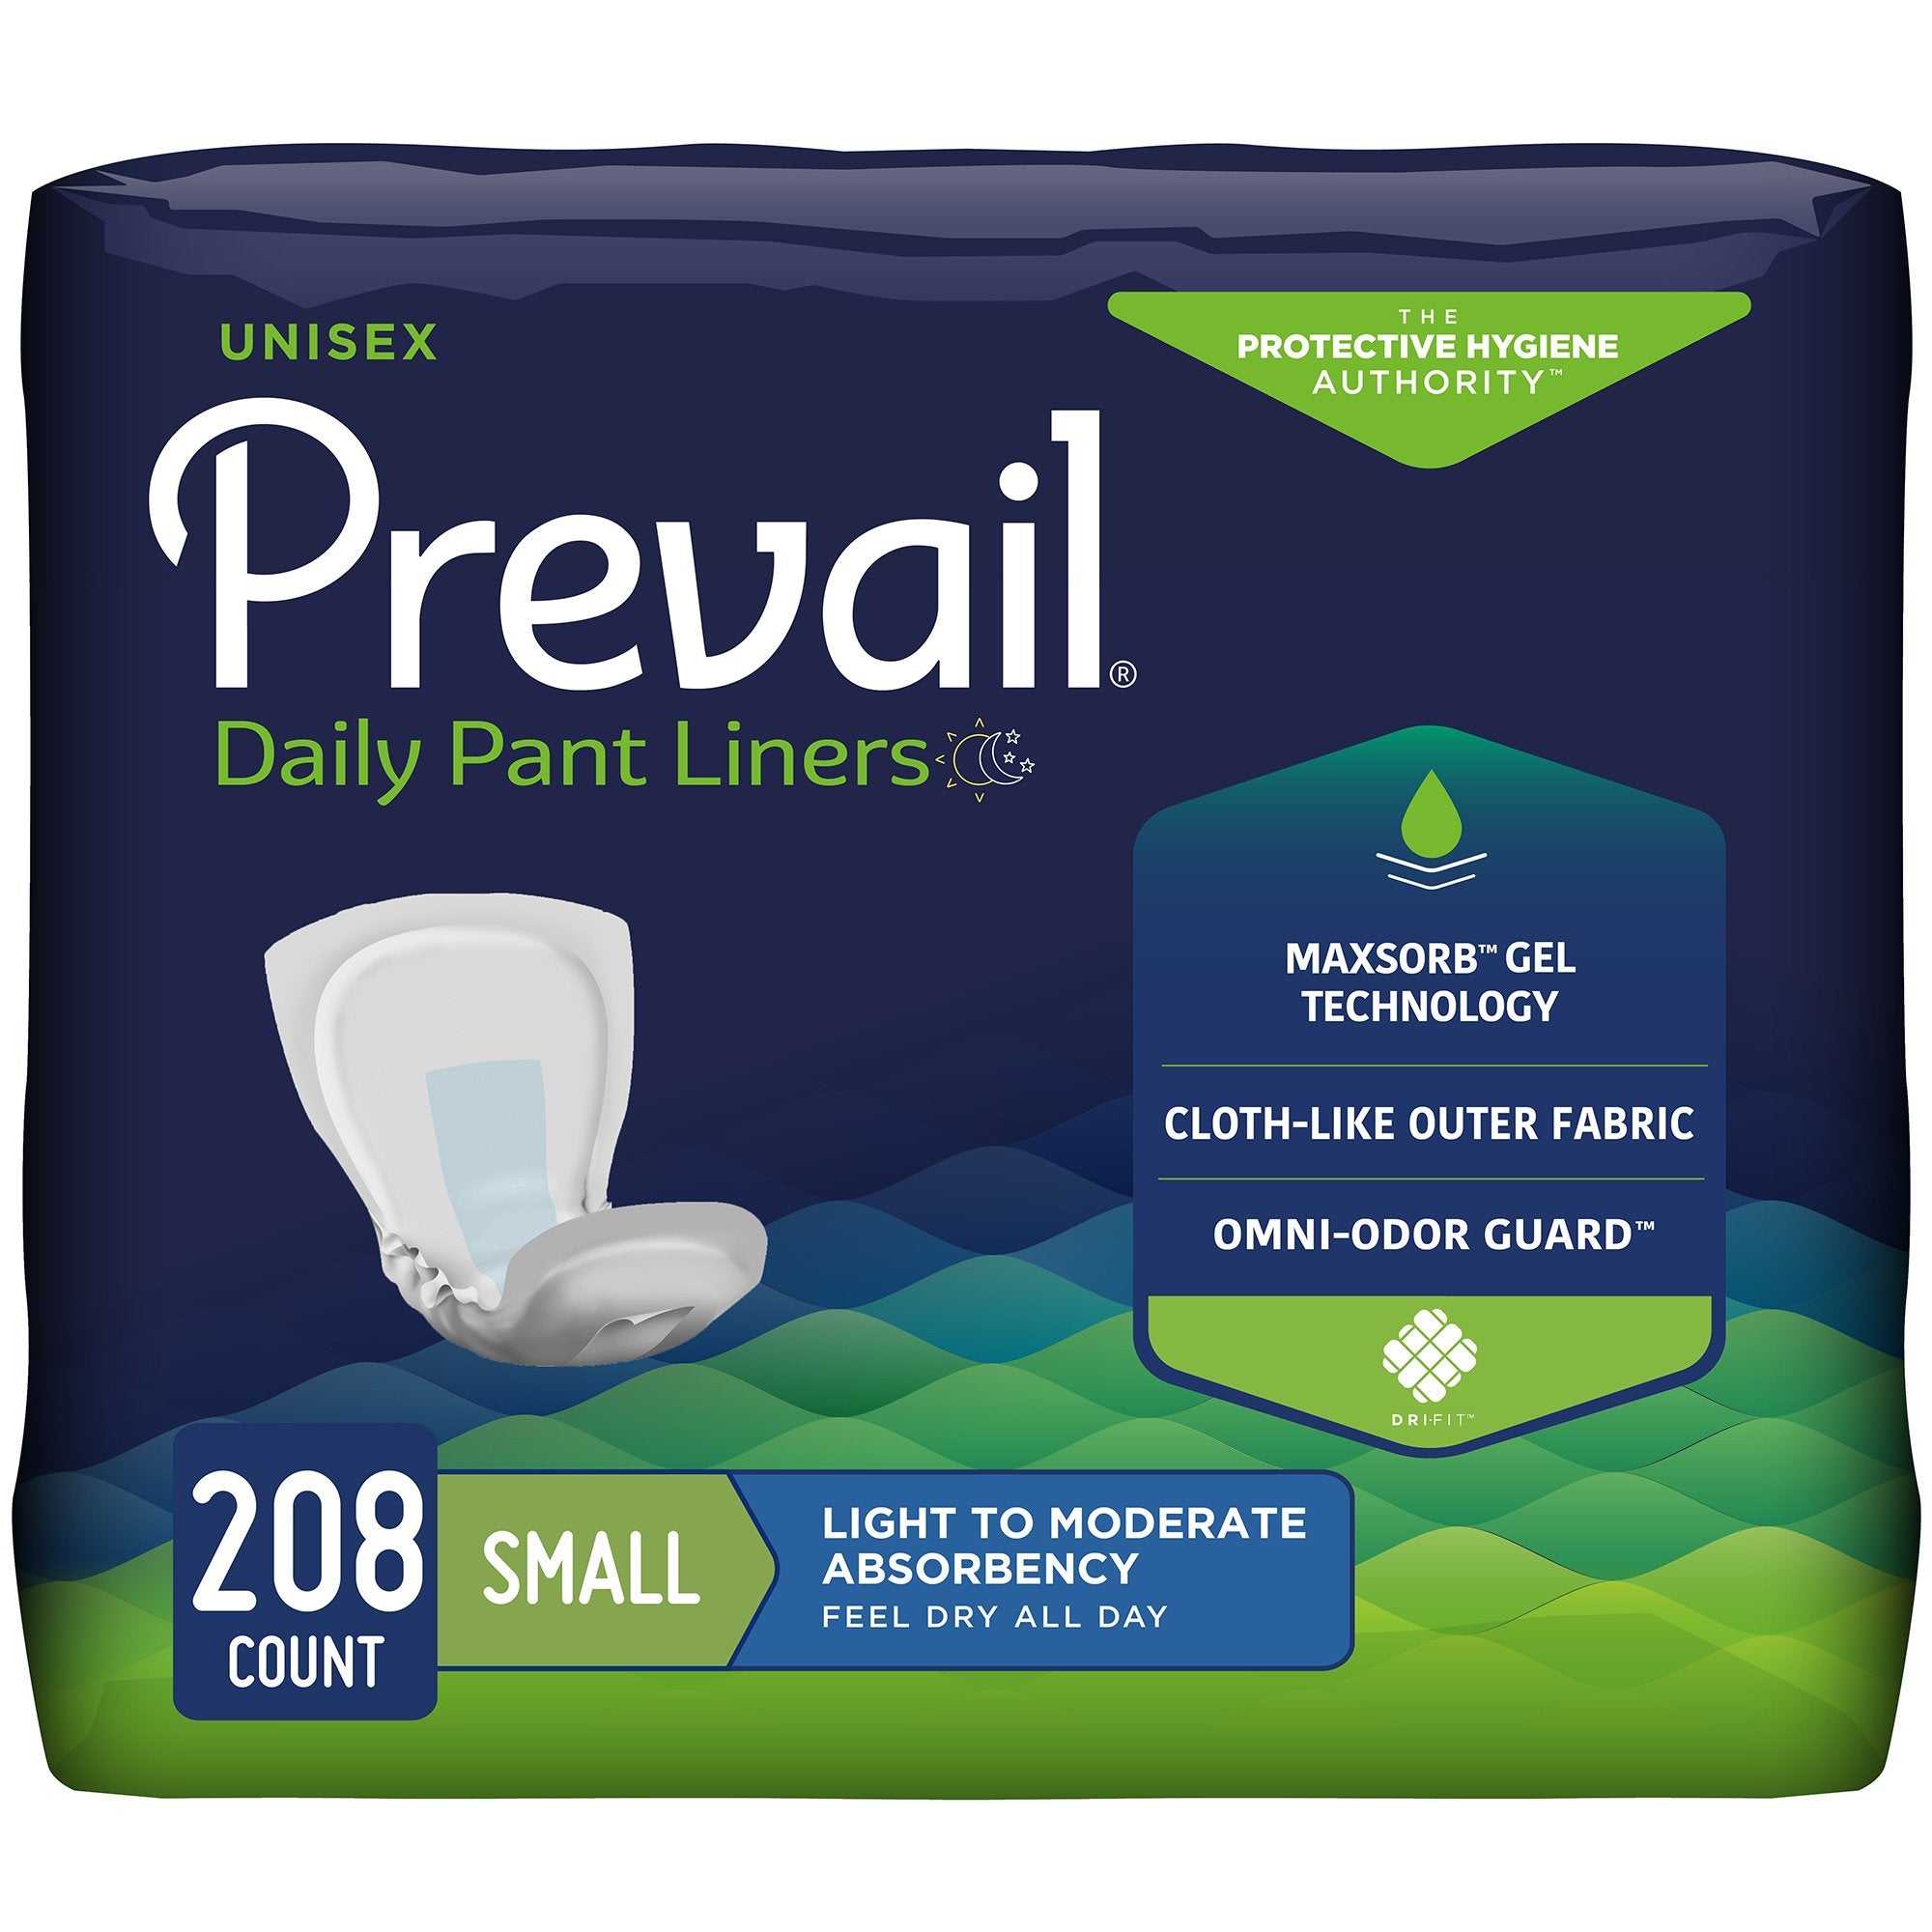 Bladder Control Pad Prevail Daily Pant Liners 12-1/2 Inch Length Moderate Absorbency Polymer Core Small